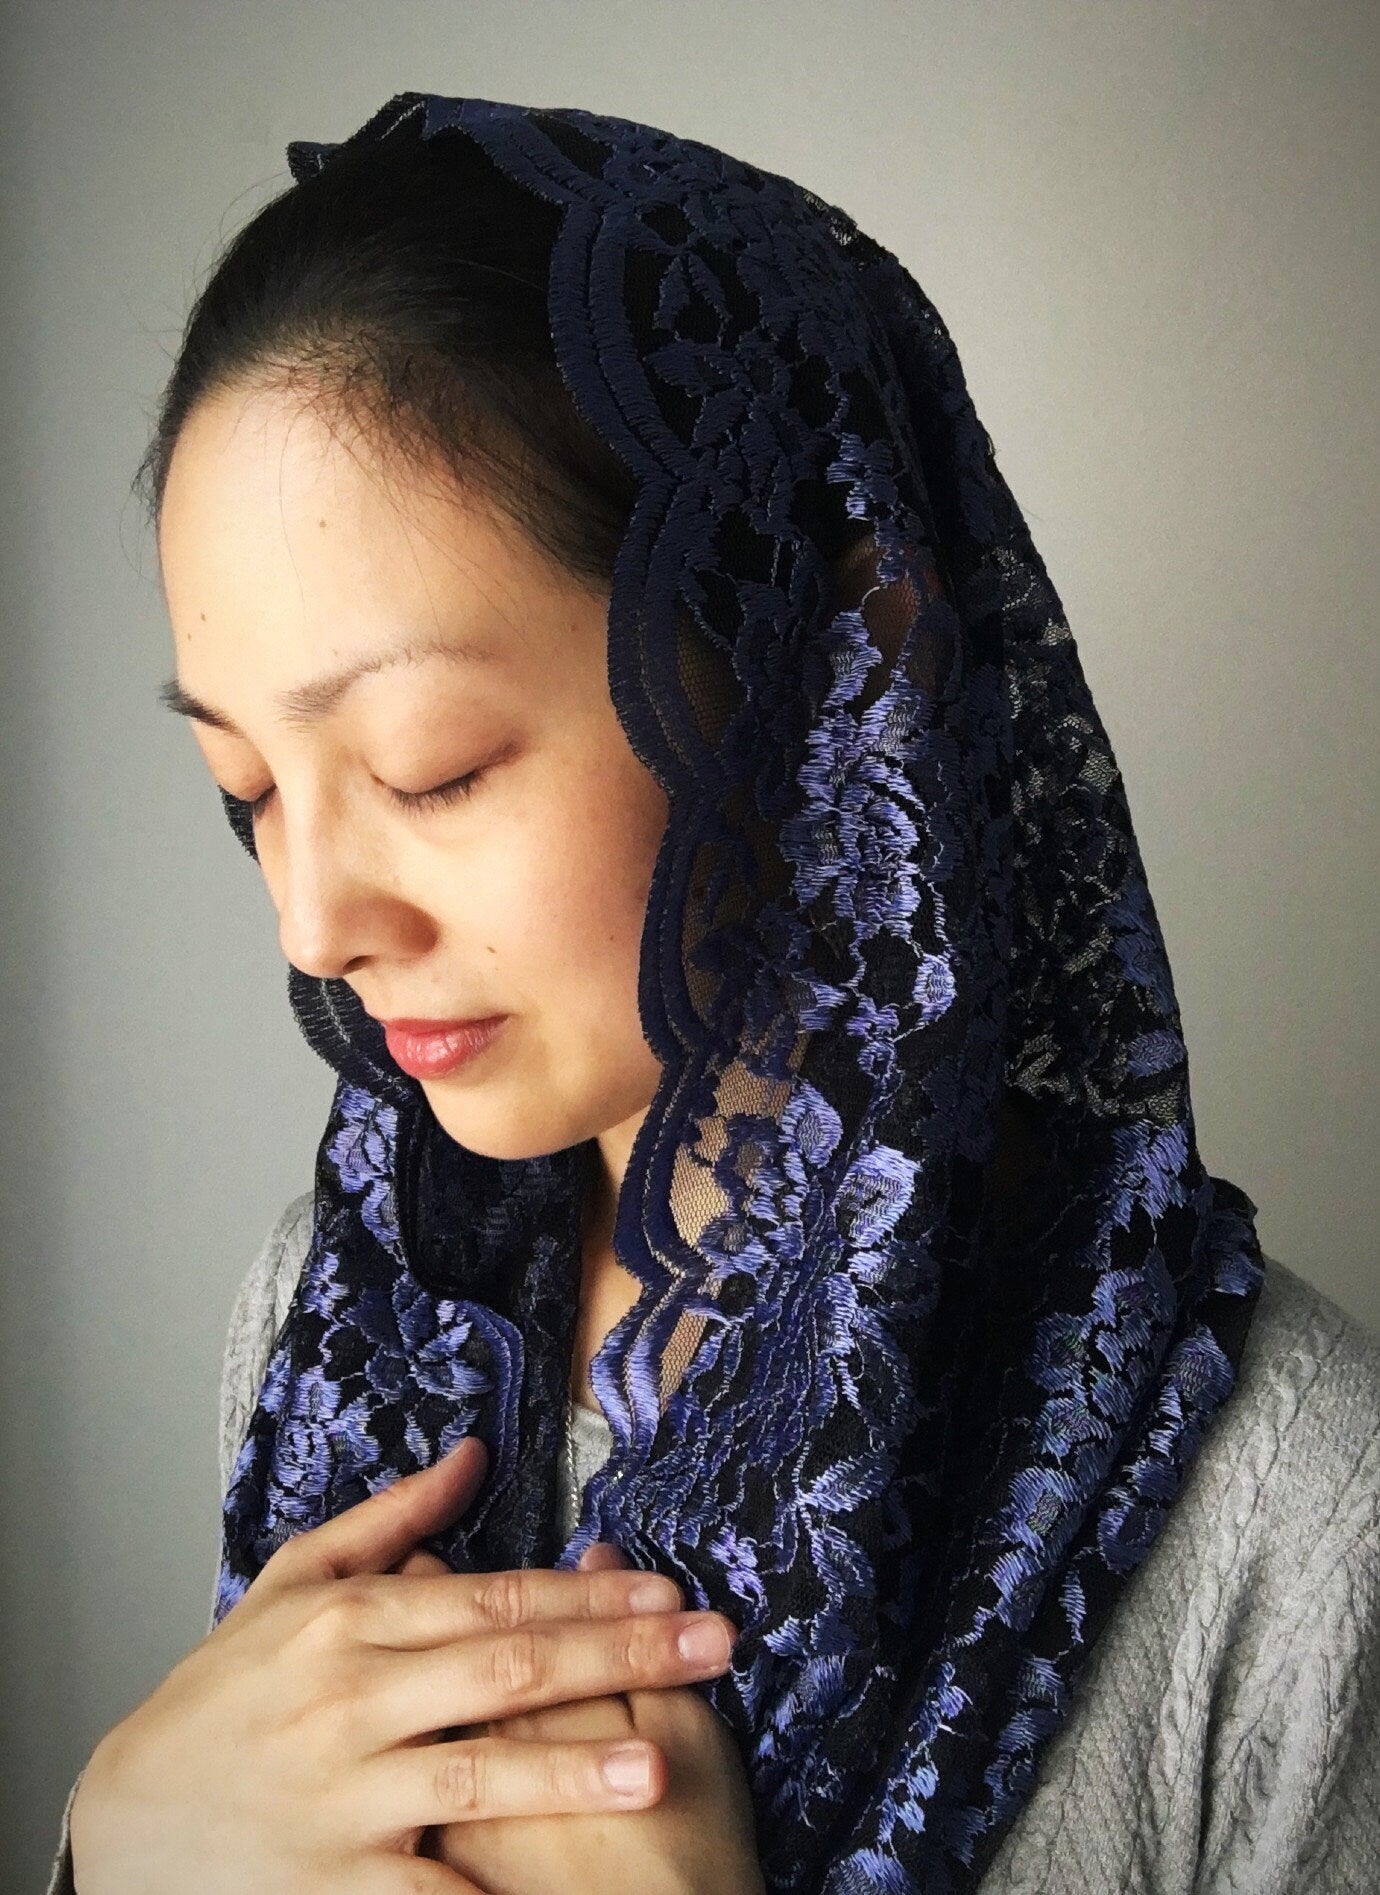 Our Lady of the Immaculate Conception Infinity Chapel Veil (Blue-Purple & Black)